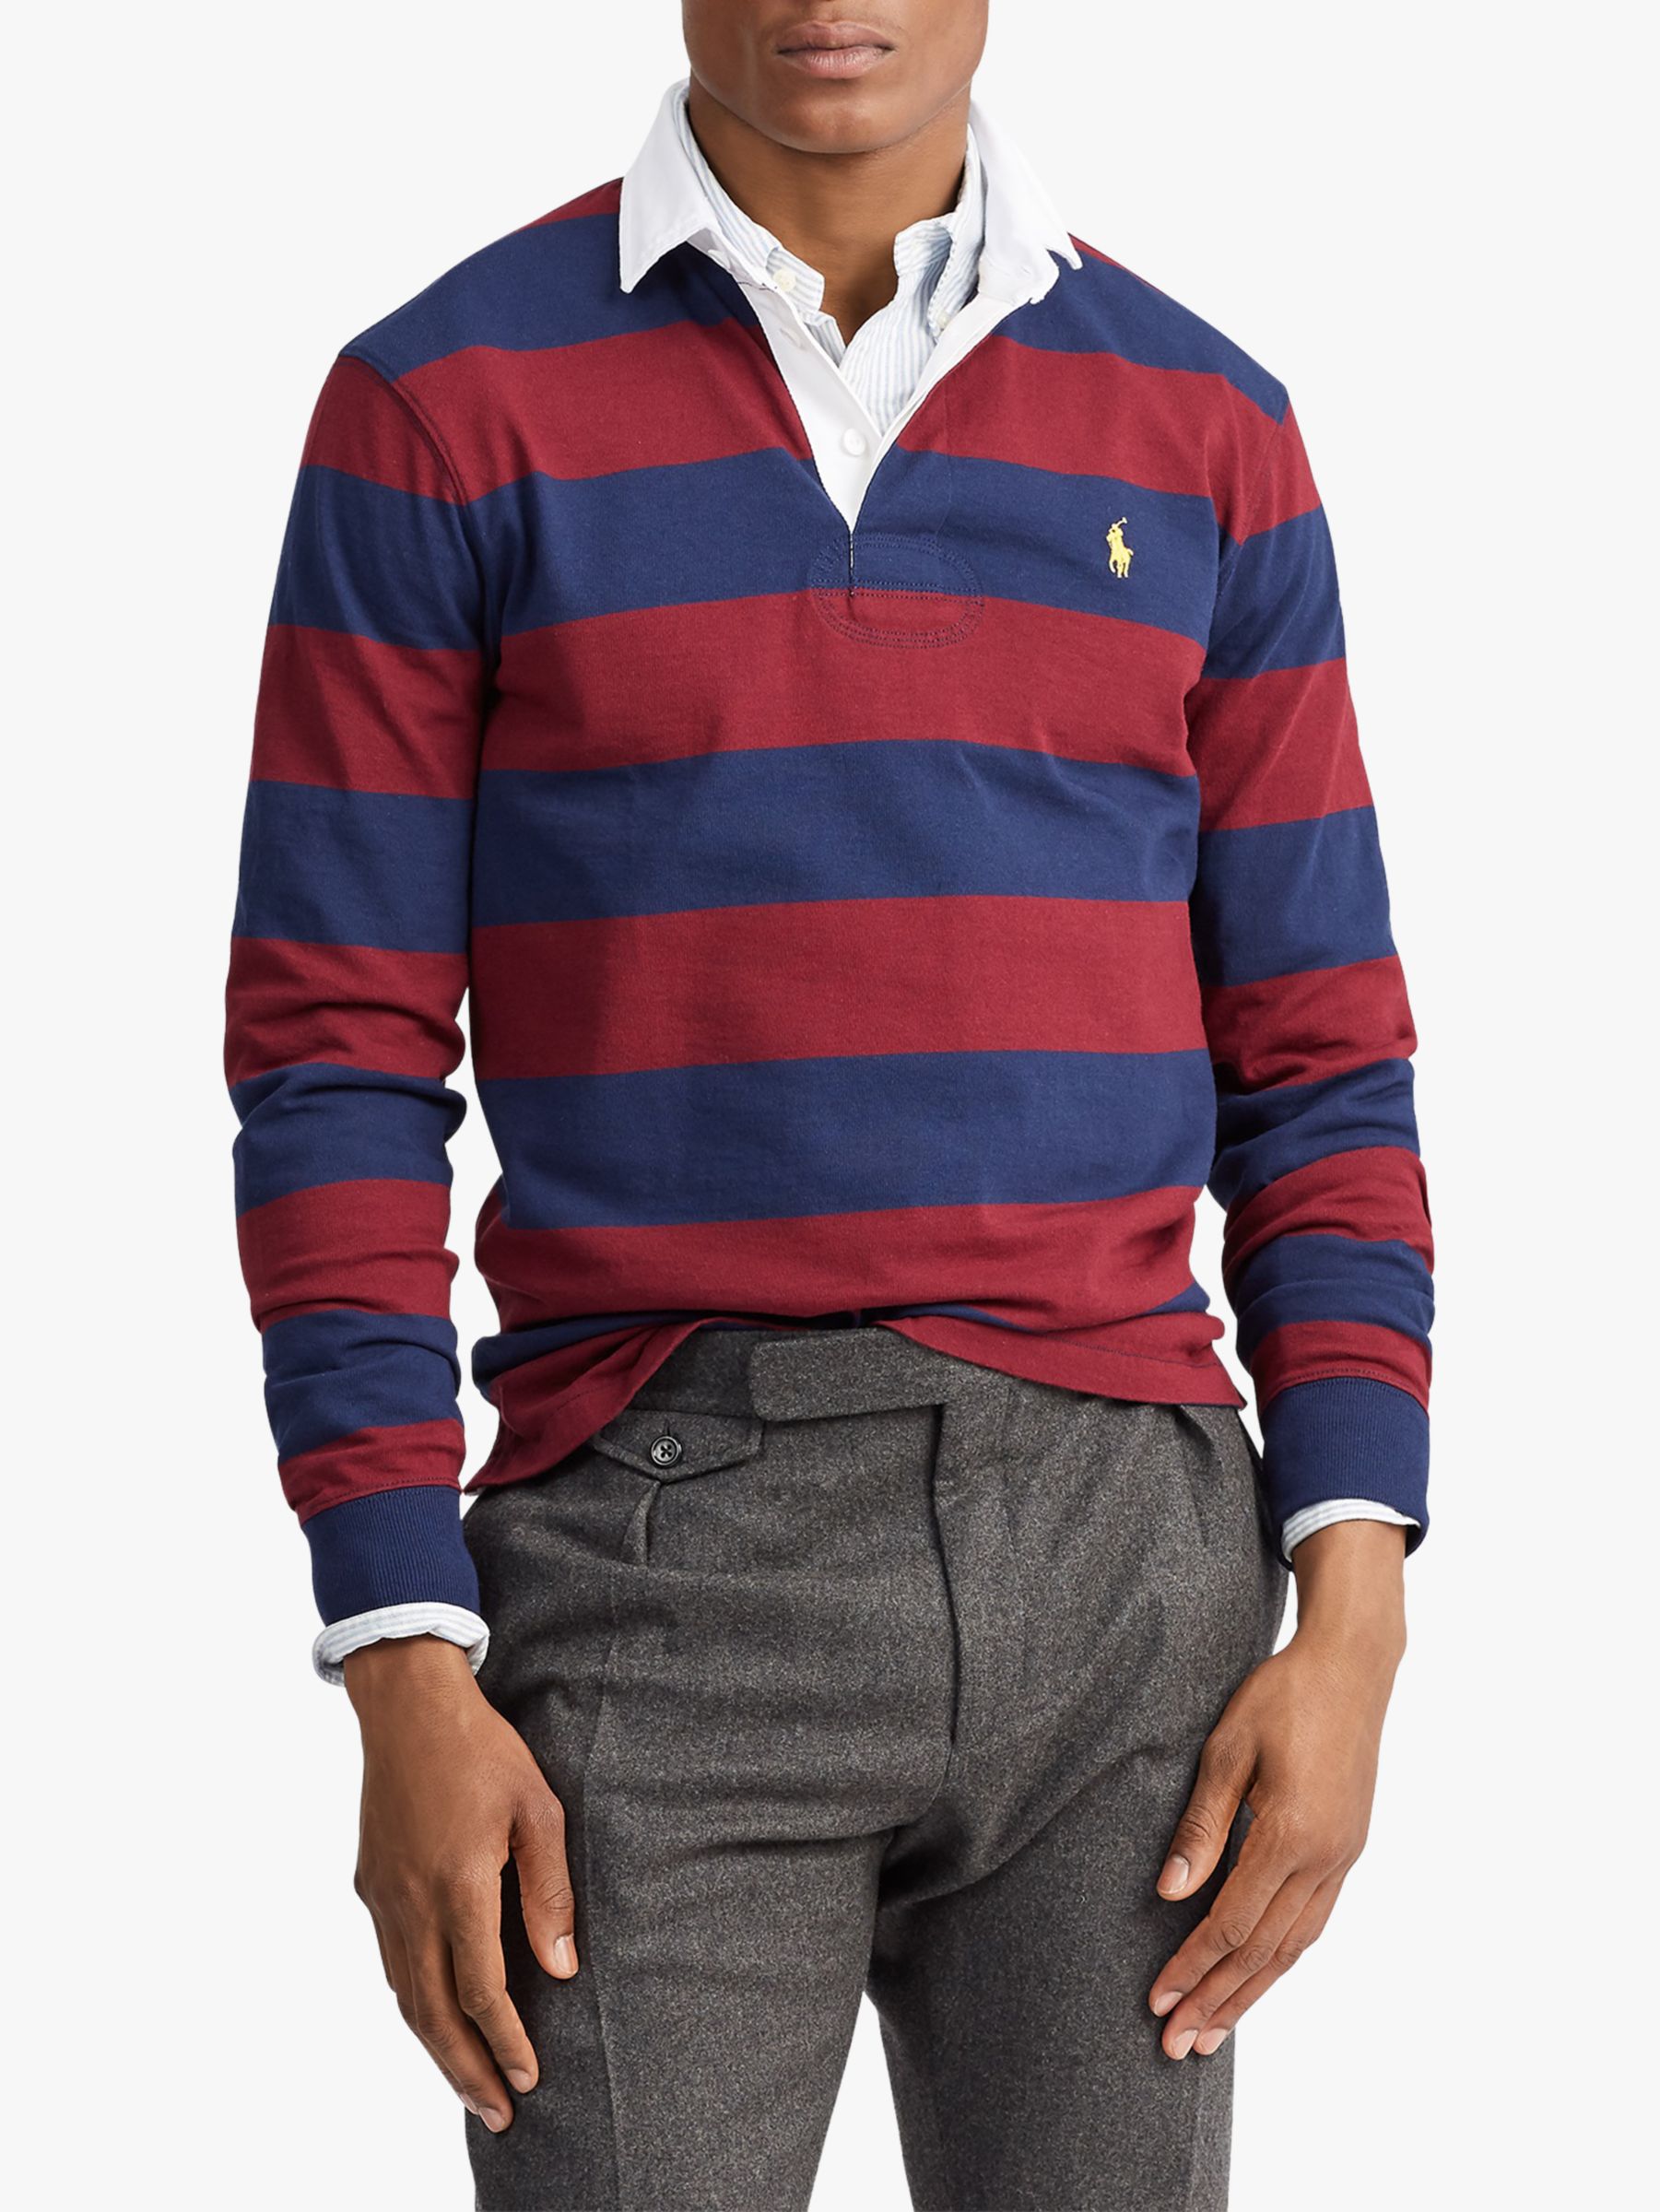 Polo Ralph Lauren Stripe Rugby Shirt at 